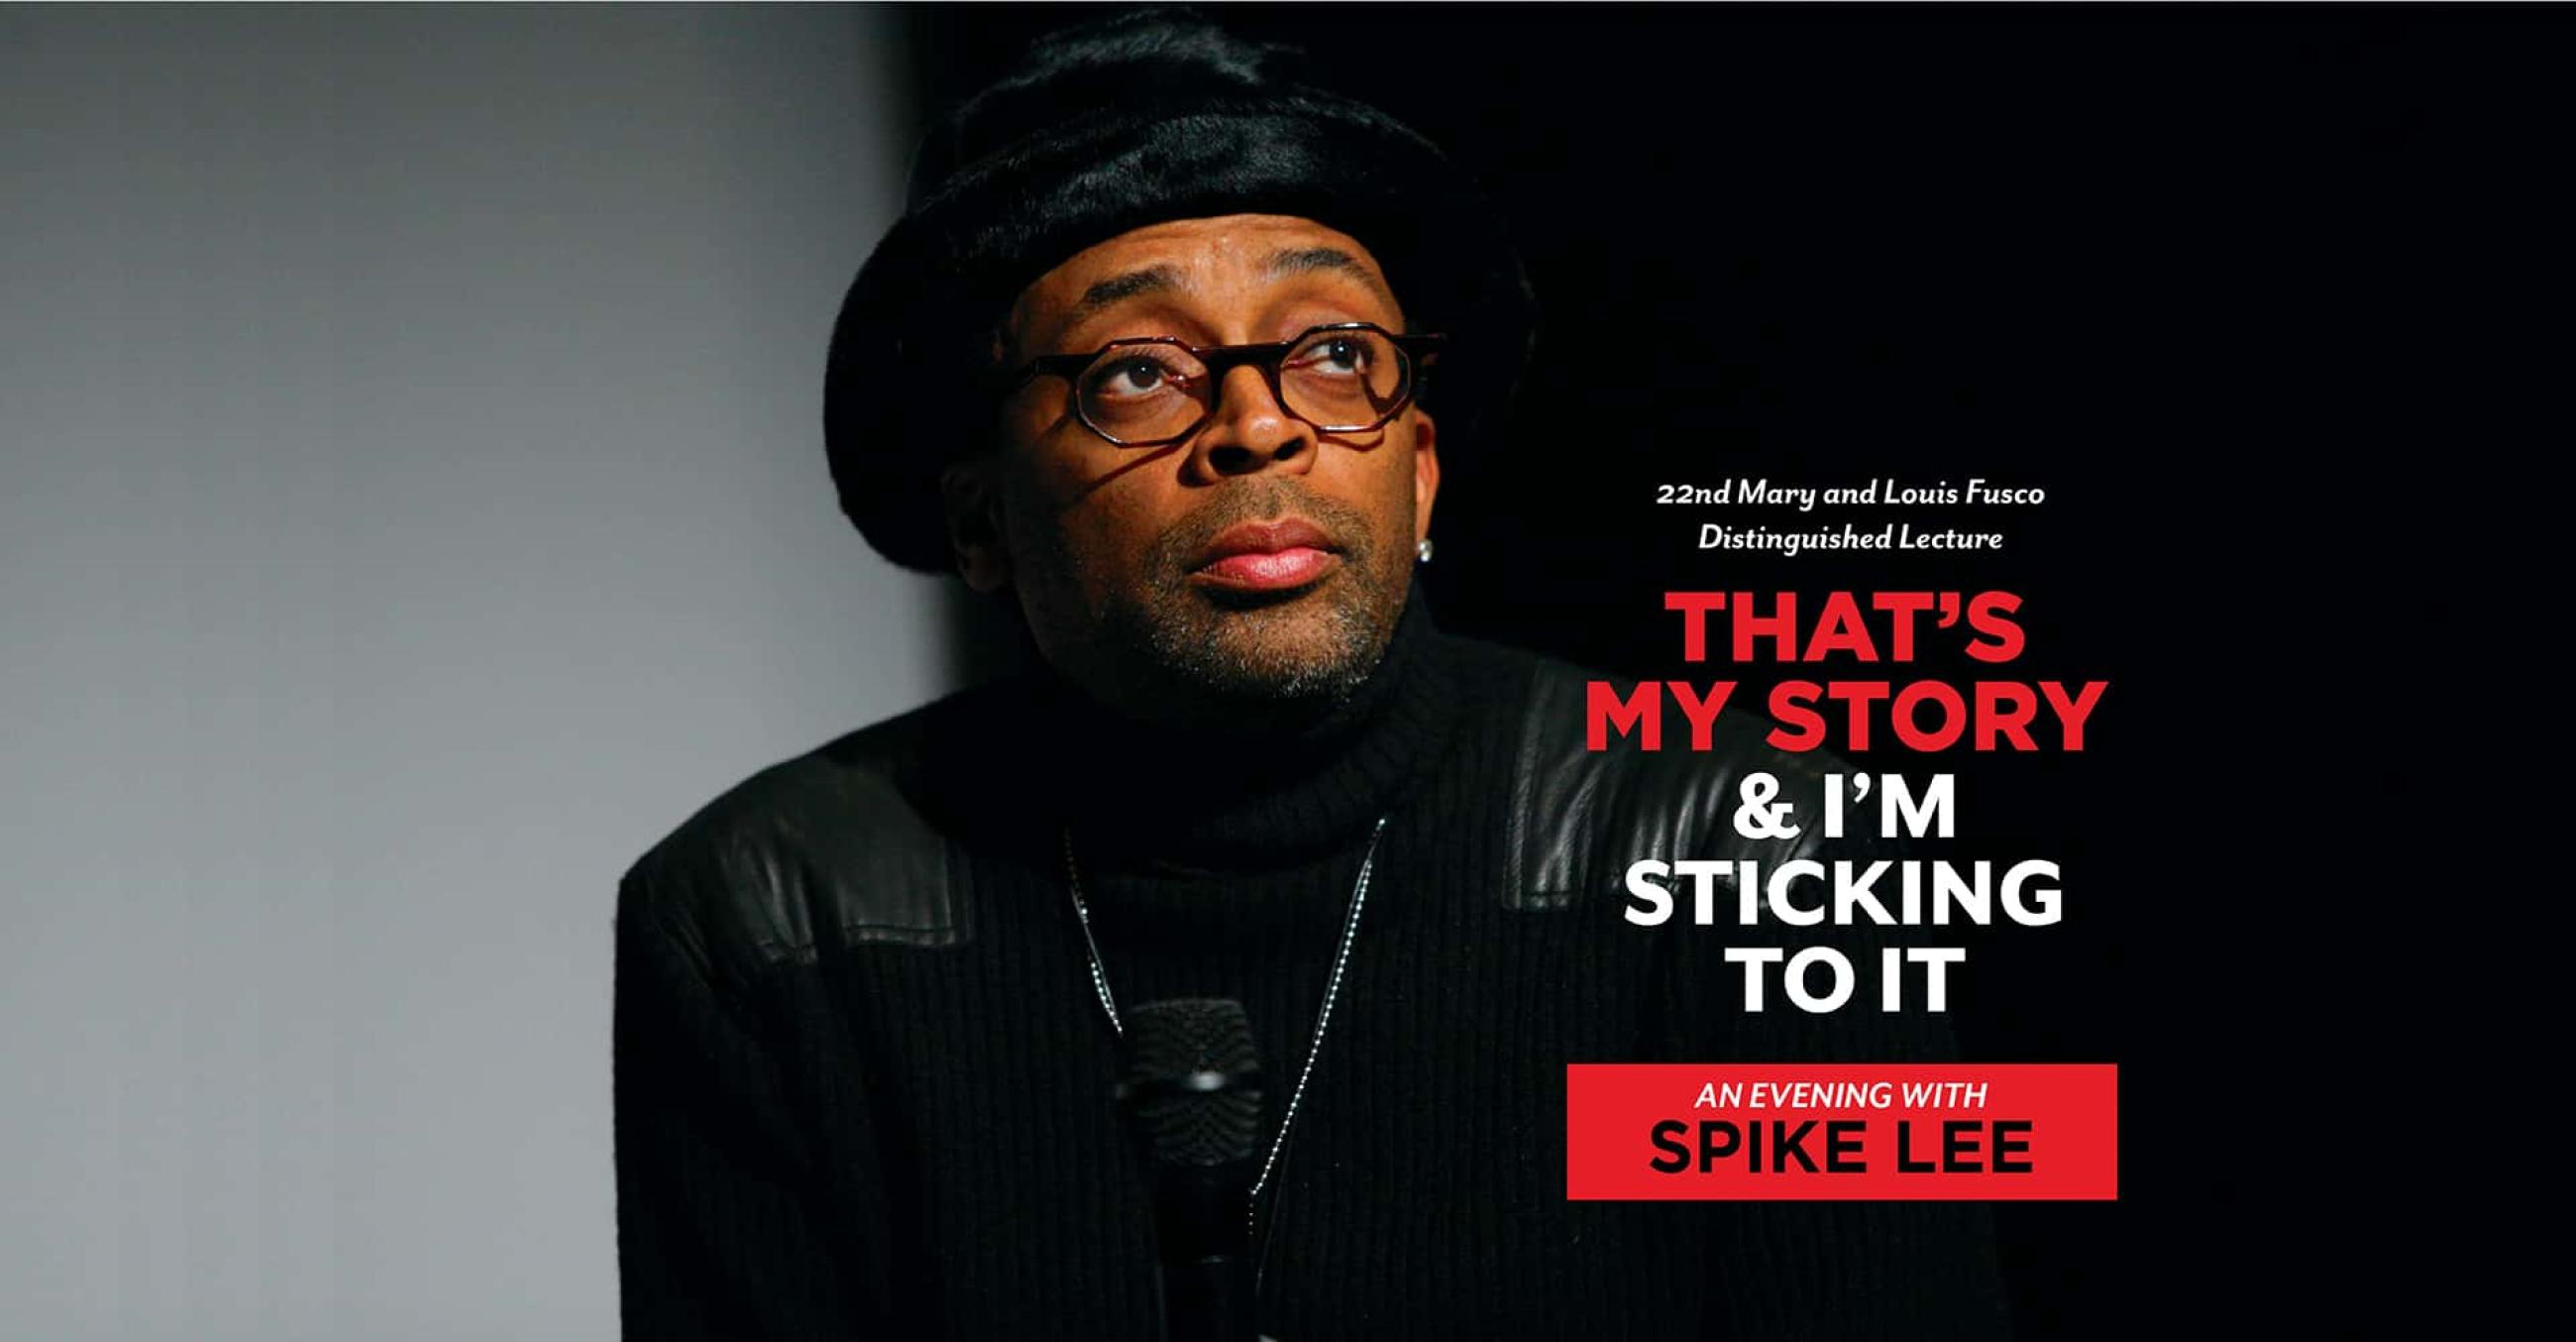 an image of Spike Lee with the words "That’s My Story & I’m Sticking to It - An Evening with Spike Lee"